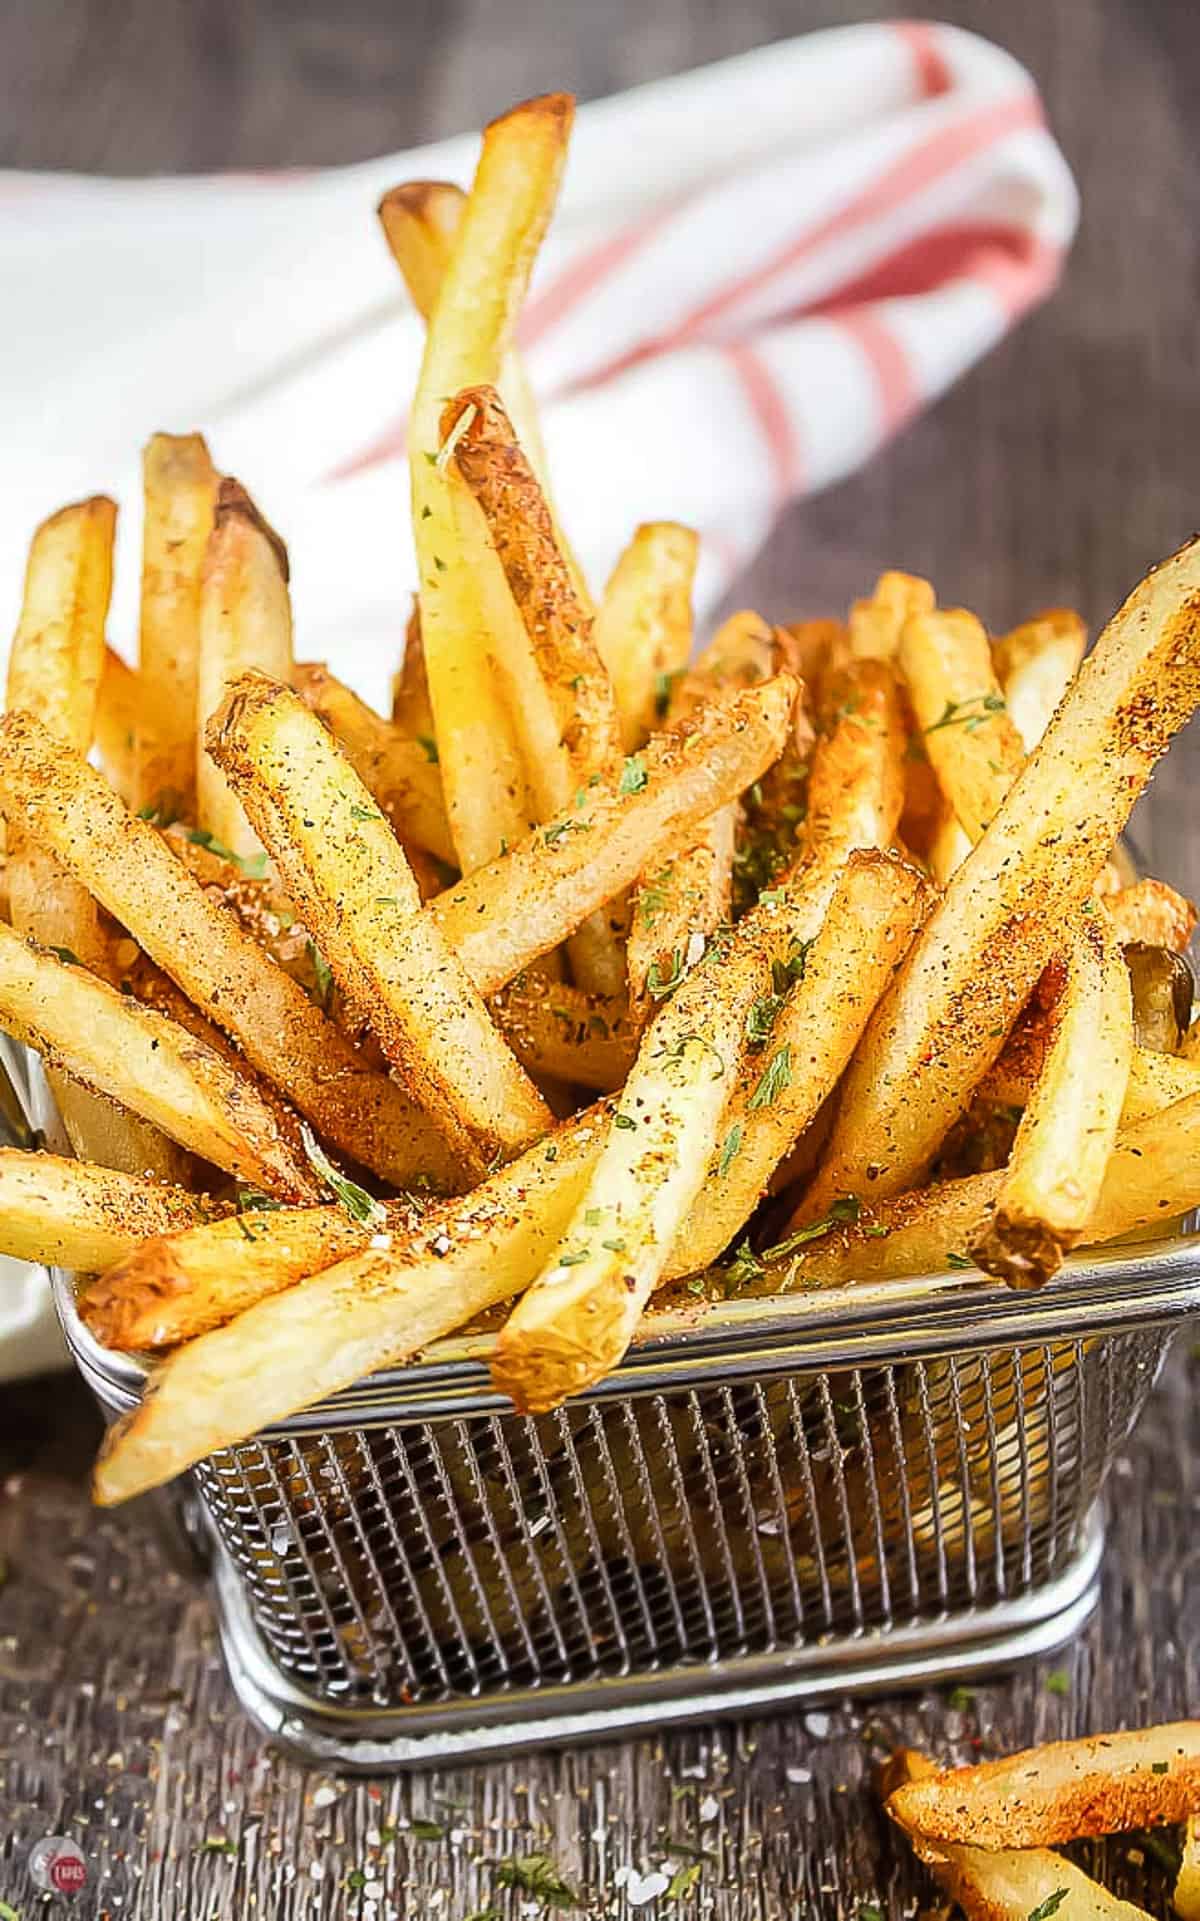 French Fry Seasoning Recipe - great for twice fried french fries!